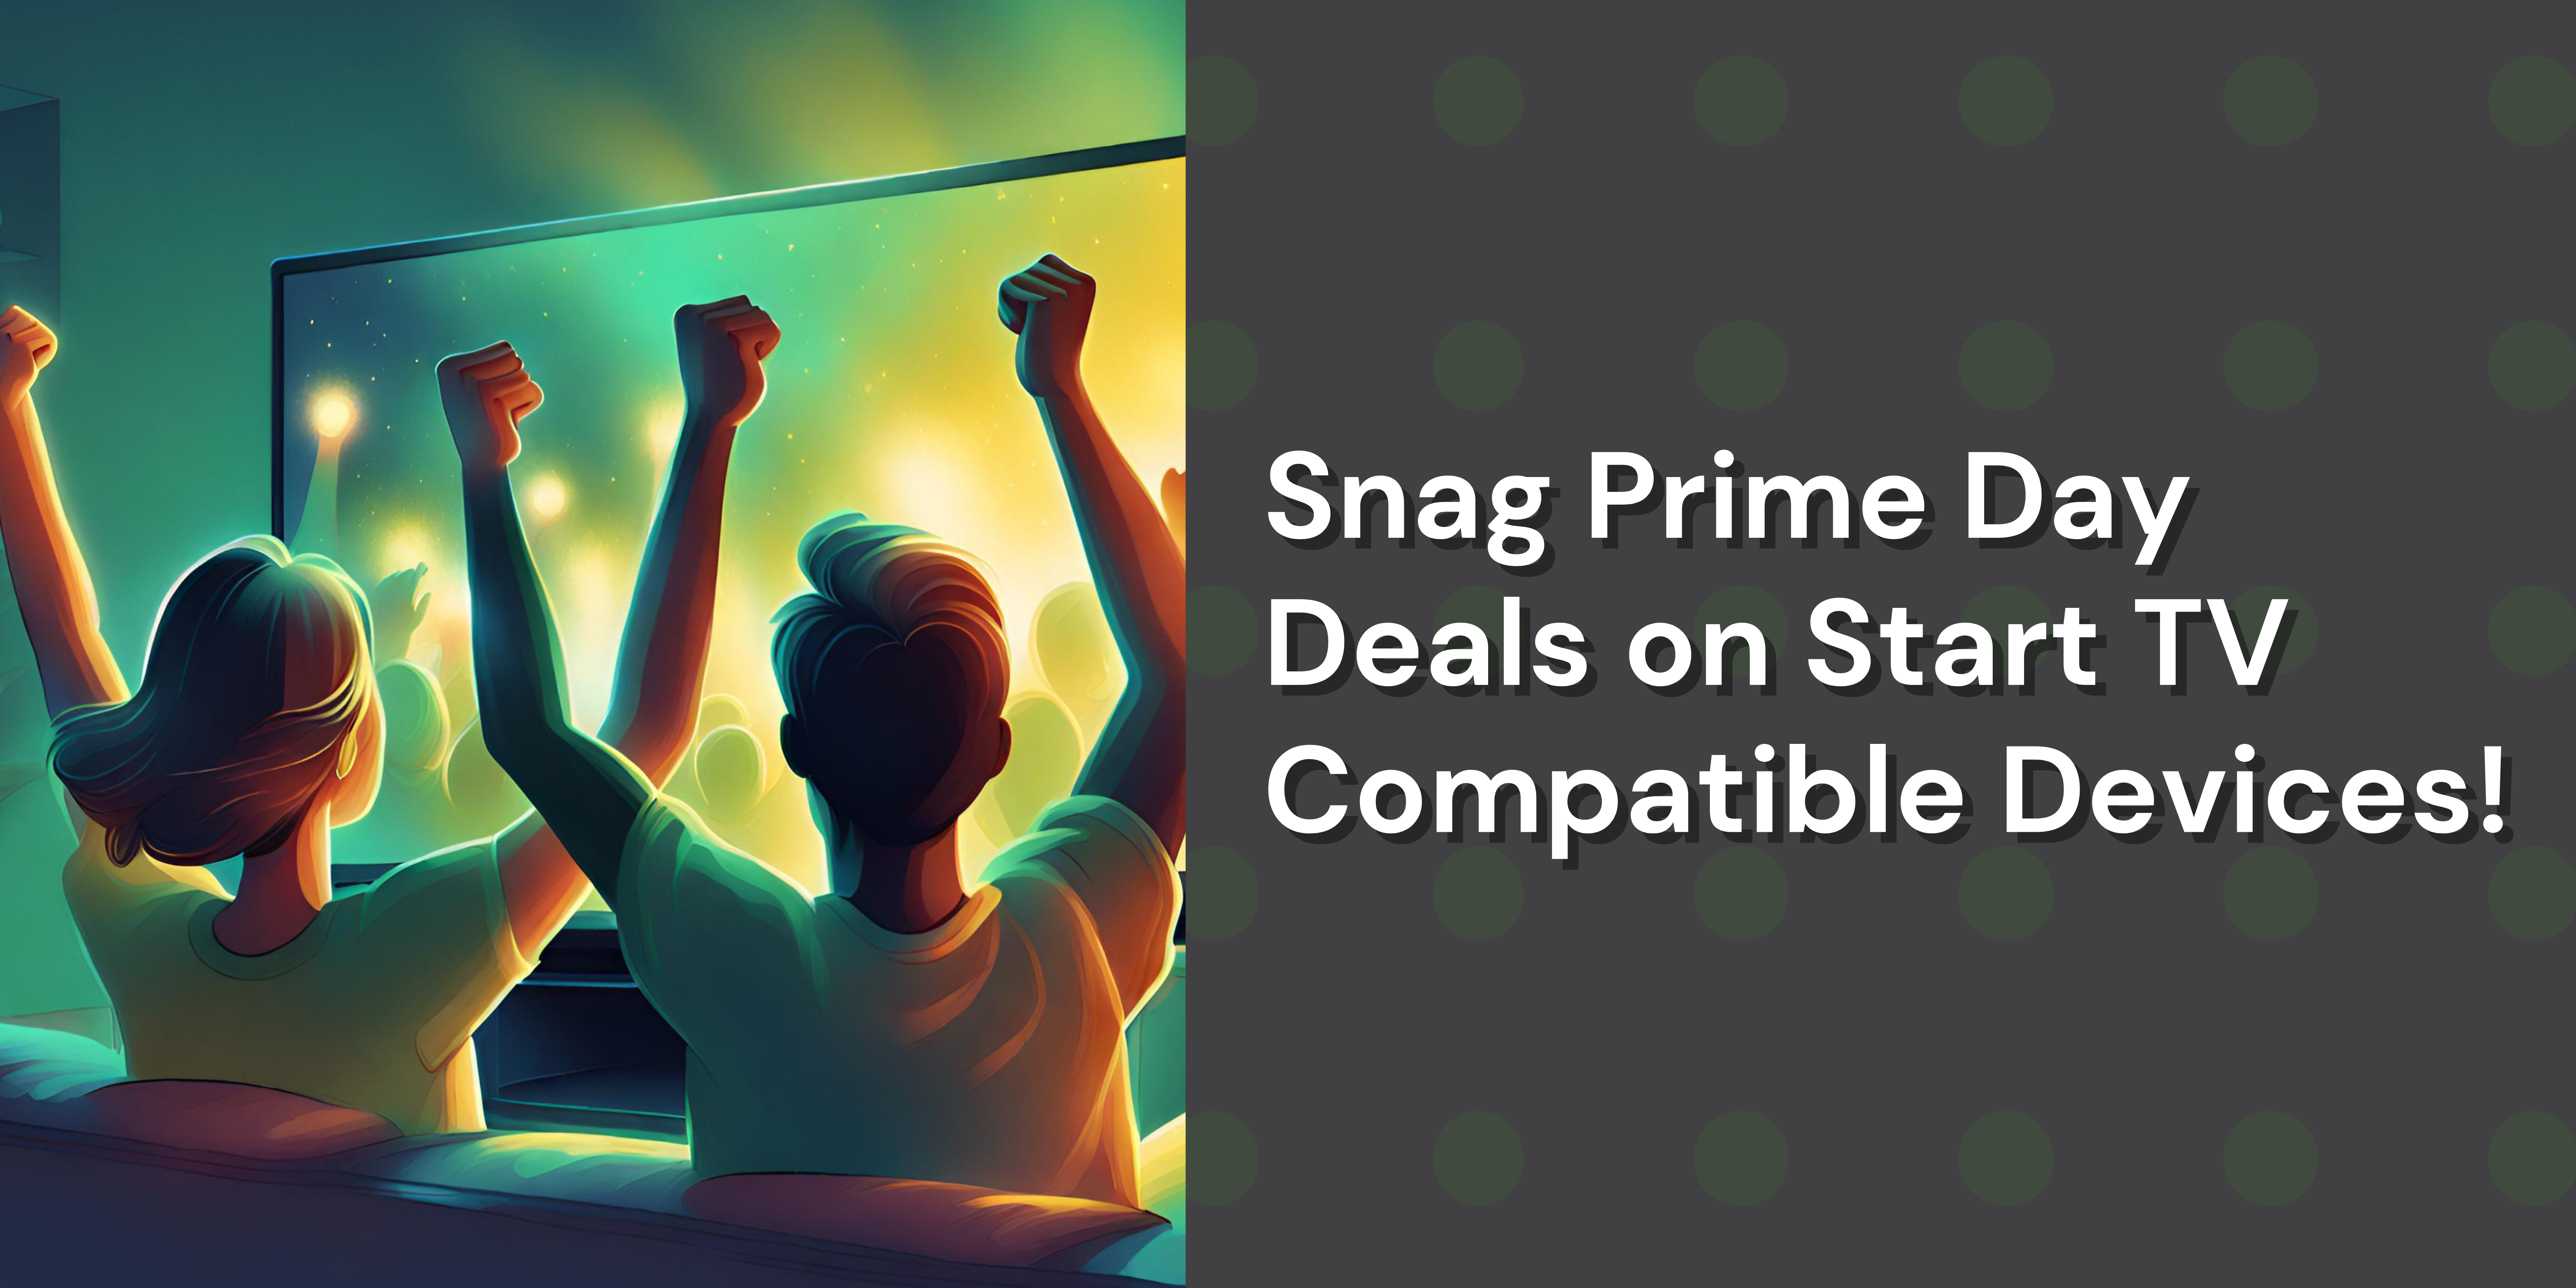 a woman and a man cheering looking at a tv with white text that says "snag prime day deals on Start TV compatible devices"